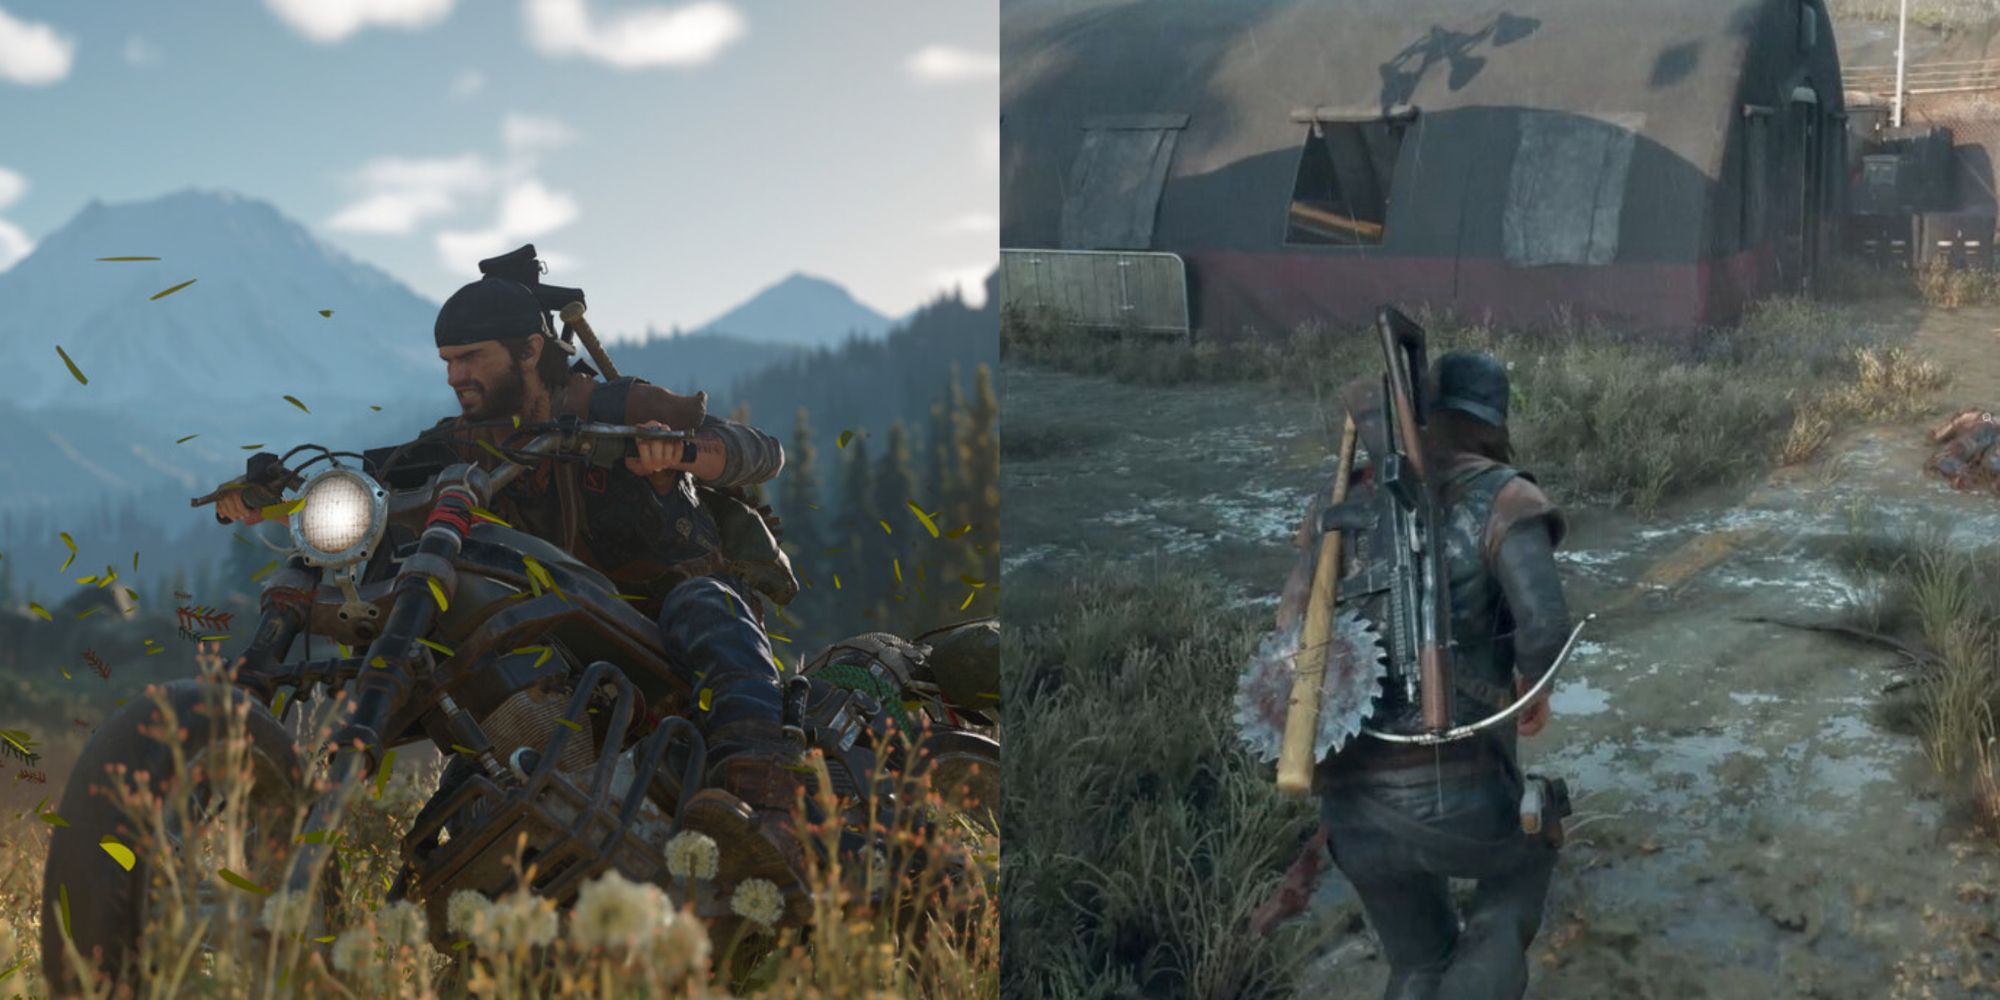 A collage showing the protagonist riding his motorbike on the left and walking into a camp on the right.